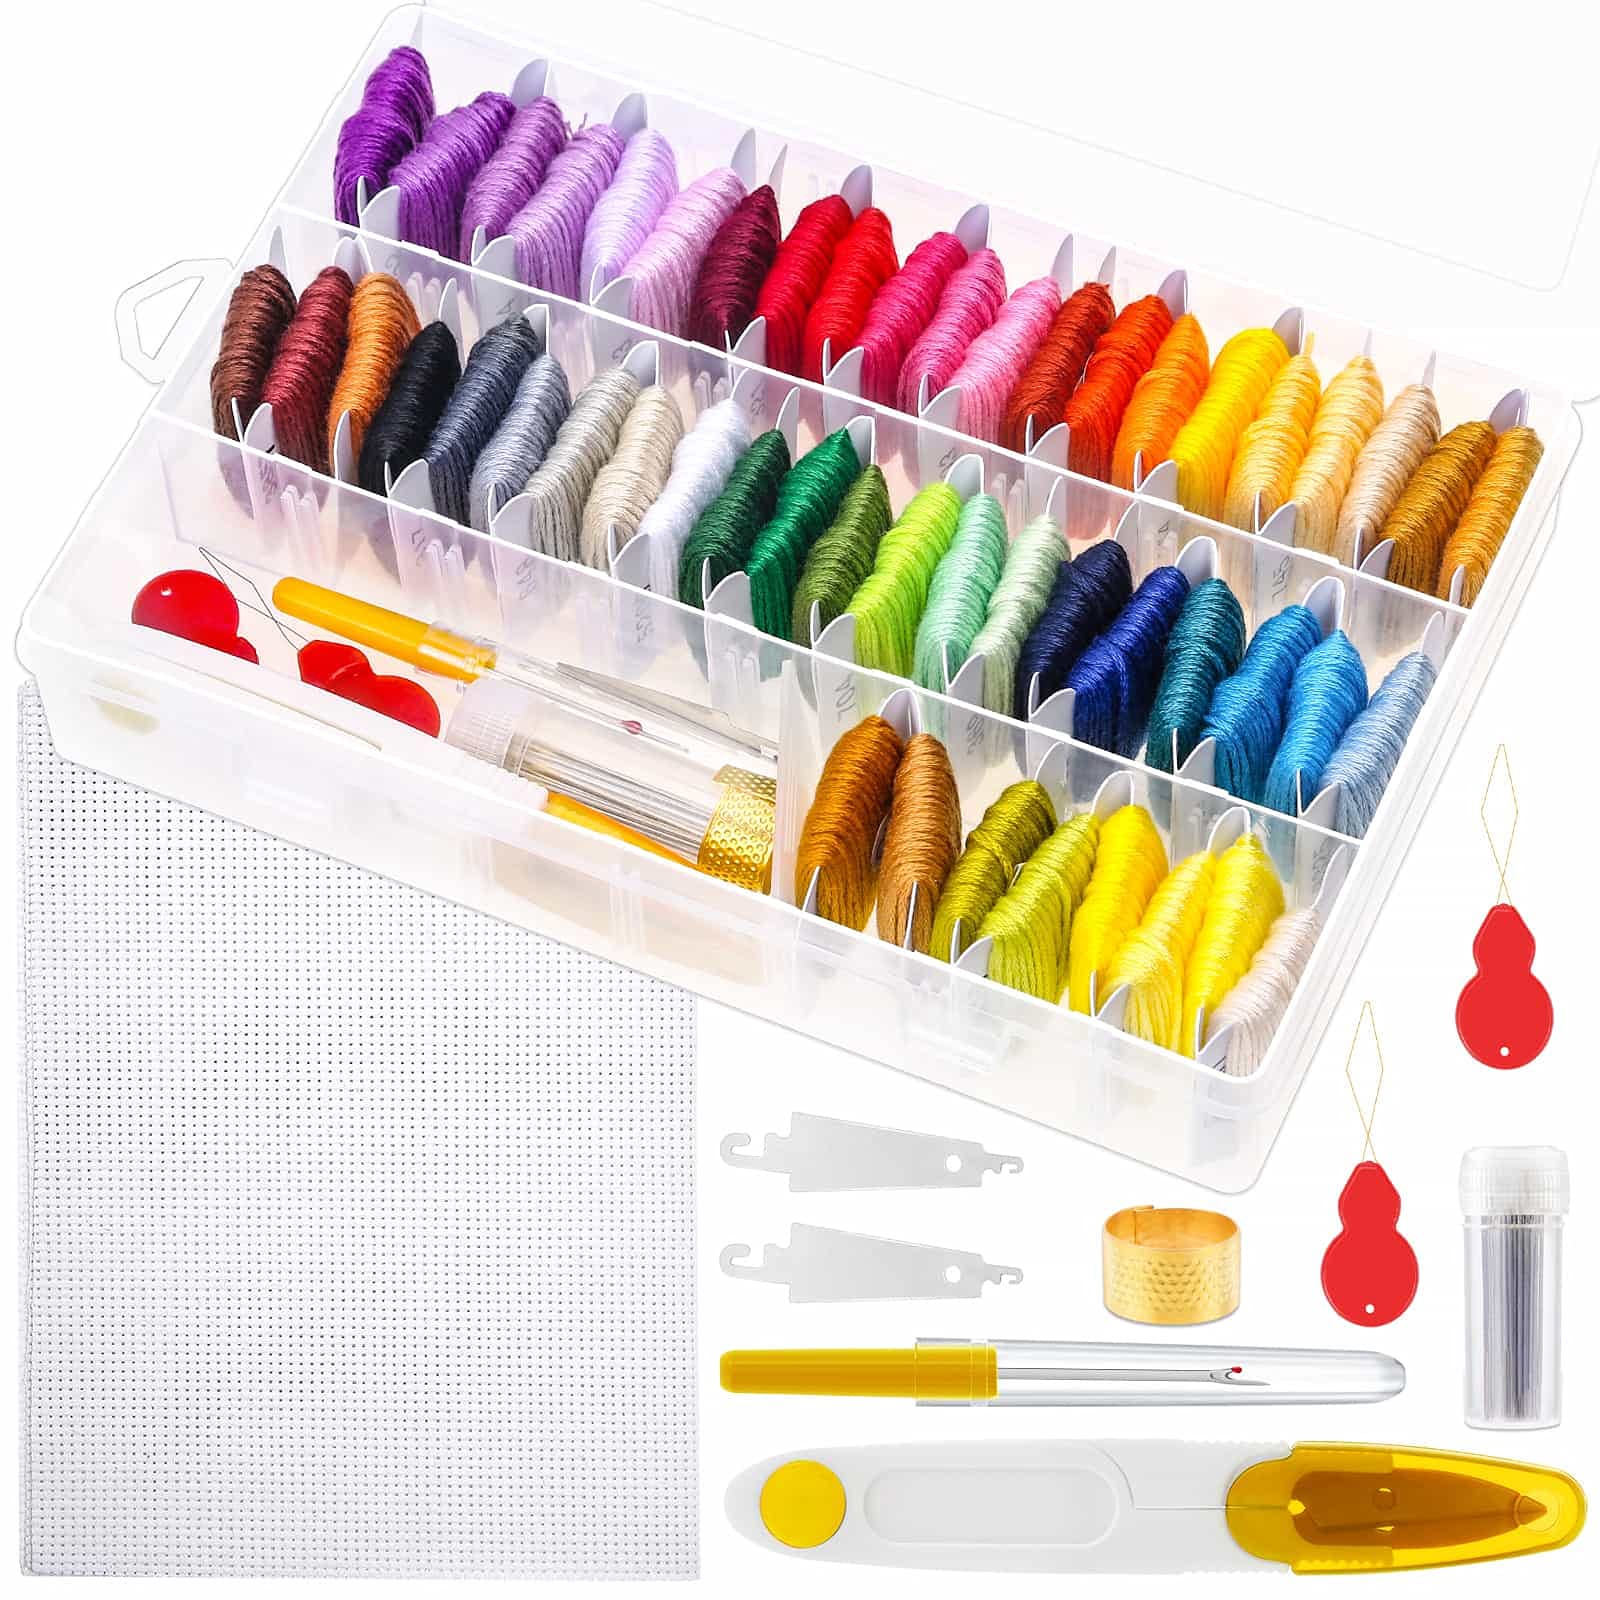 50 Pcs Embroidery Floss Kit Thread Cross Stitch Cotton Sewing DIY  Multicolor